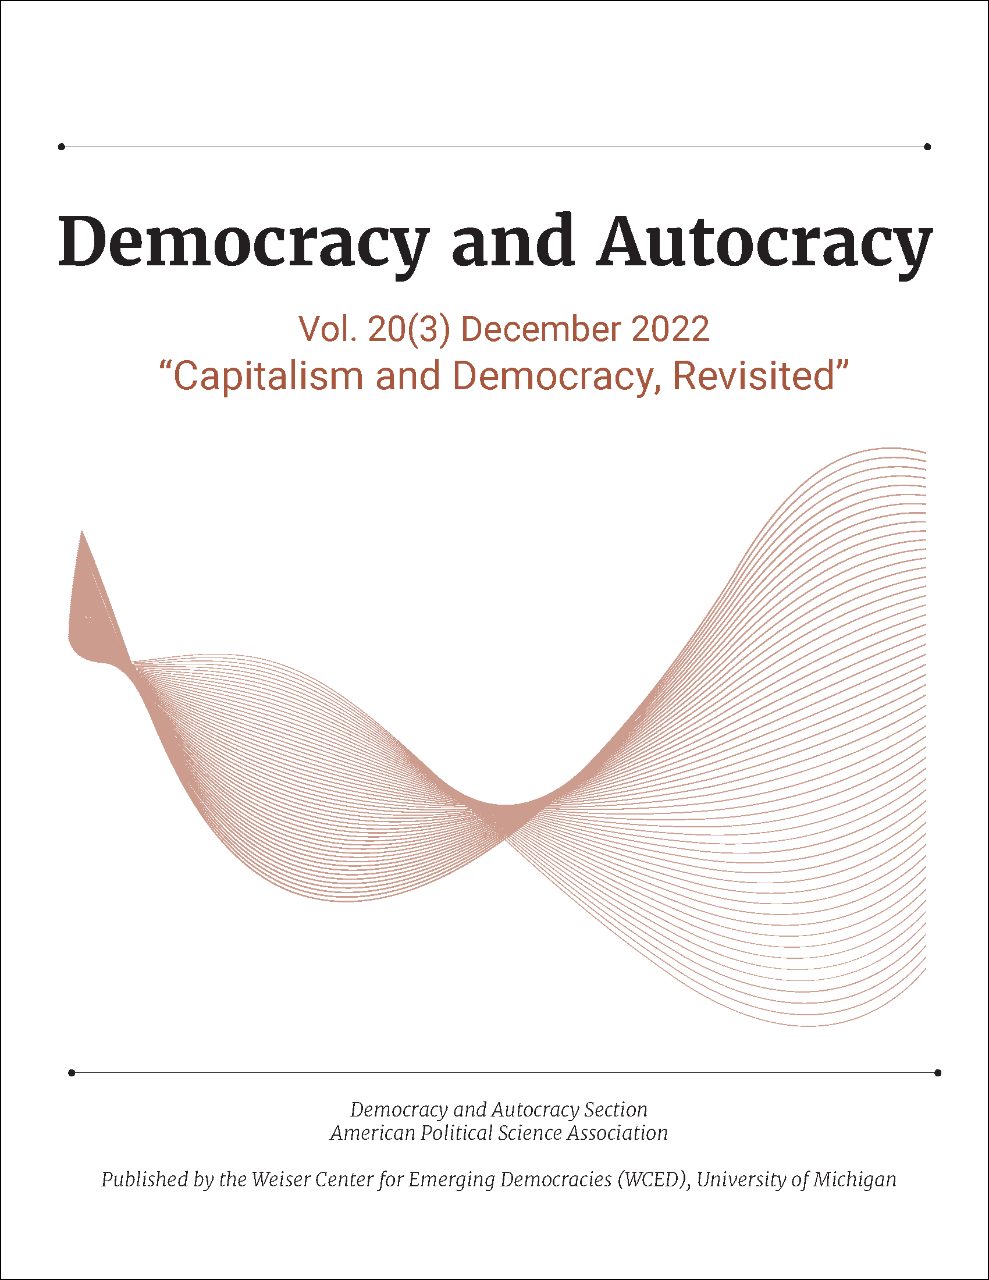 Democracy and Autocracy Vol. 20(3) December 2022, "Capitalism and Democracy, Revisited"